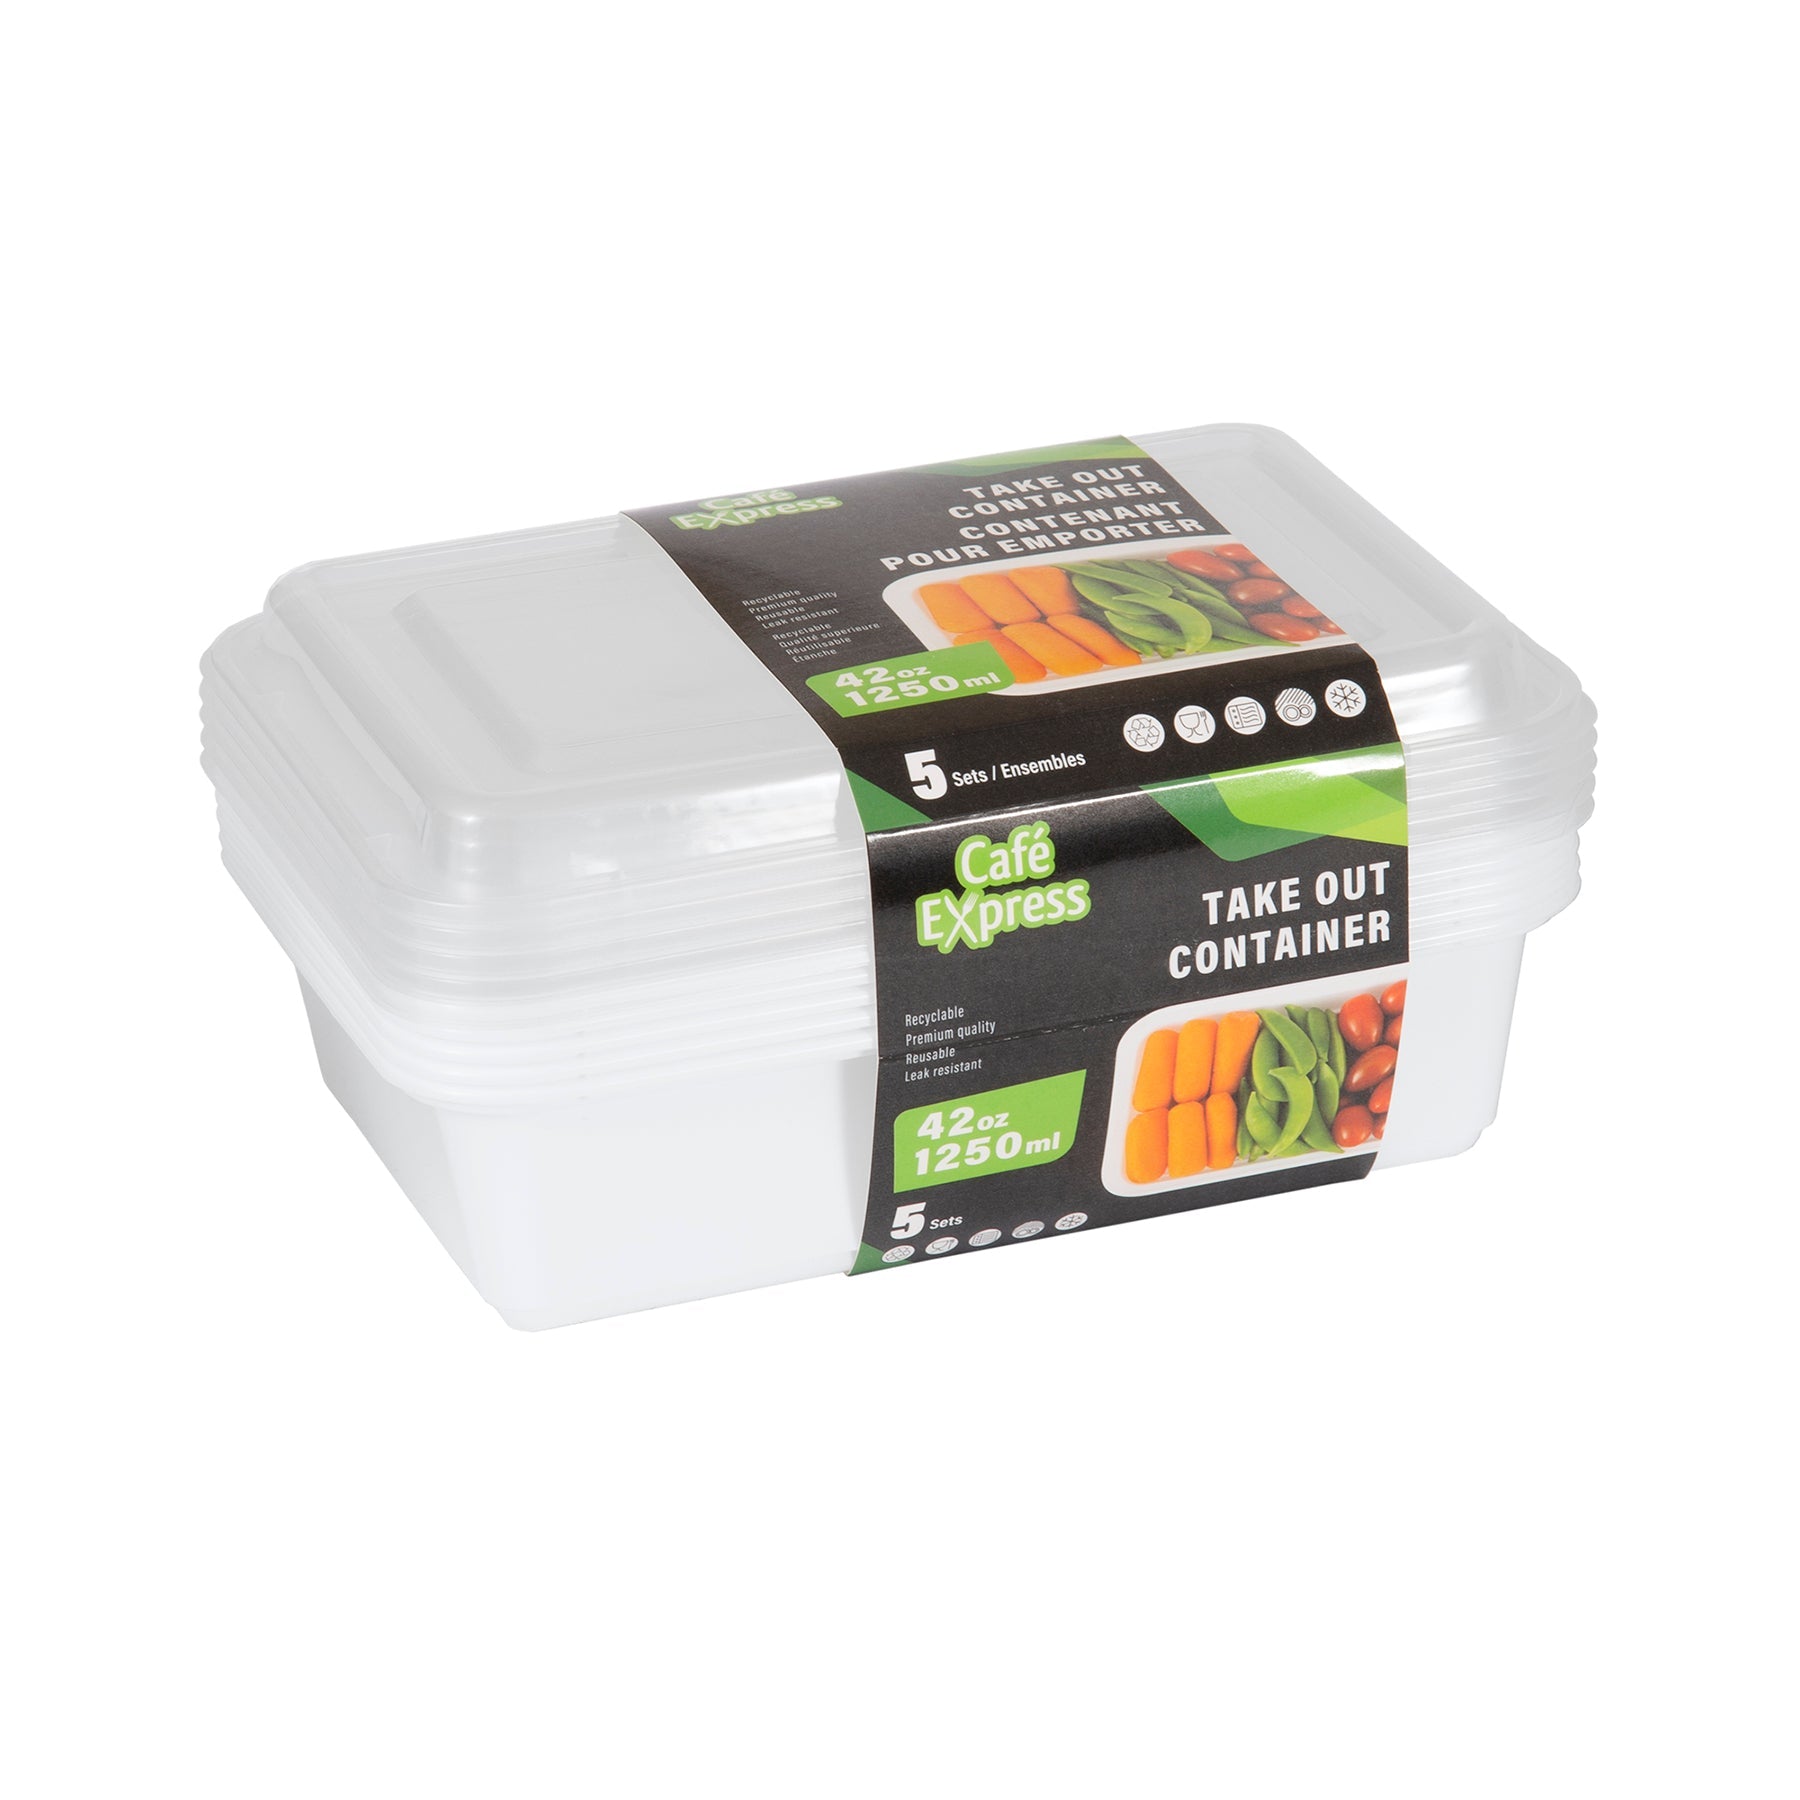 Café Express 5 Take Out Plastic Containers with Lid 42oz  7.75x5x2.25in